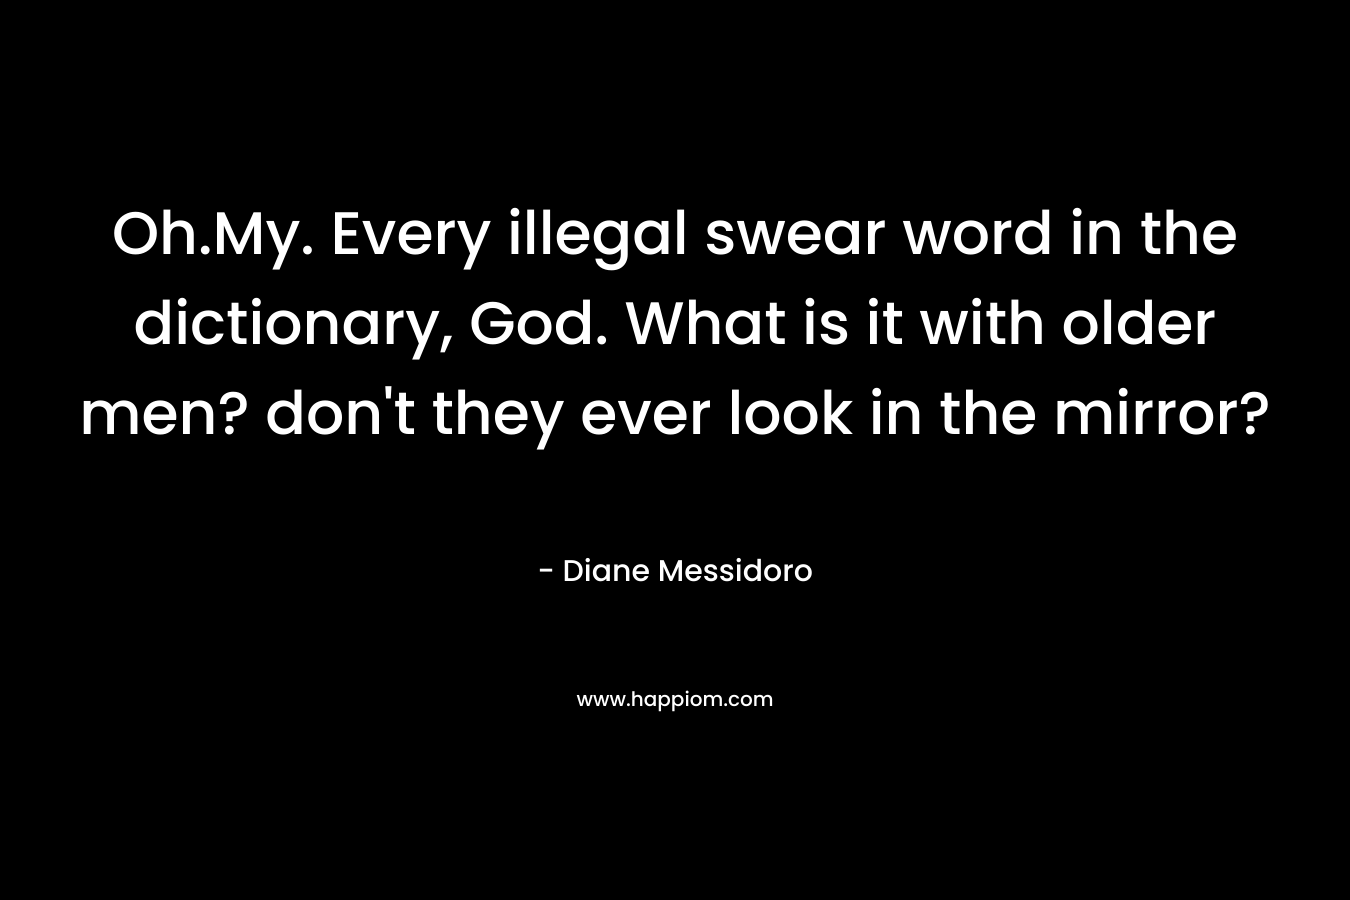 Oh.My. Every illegal swear word in the dictionary, God. What is it with older men? don’t they ever look in the mirror? – Diane Messidoro